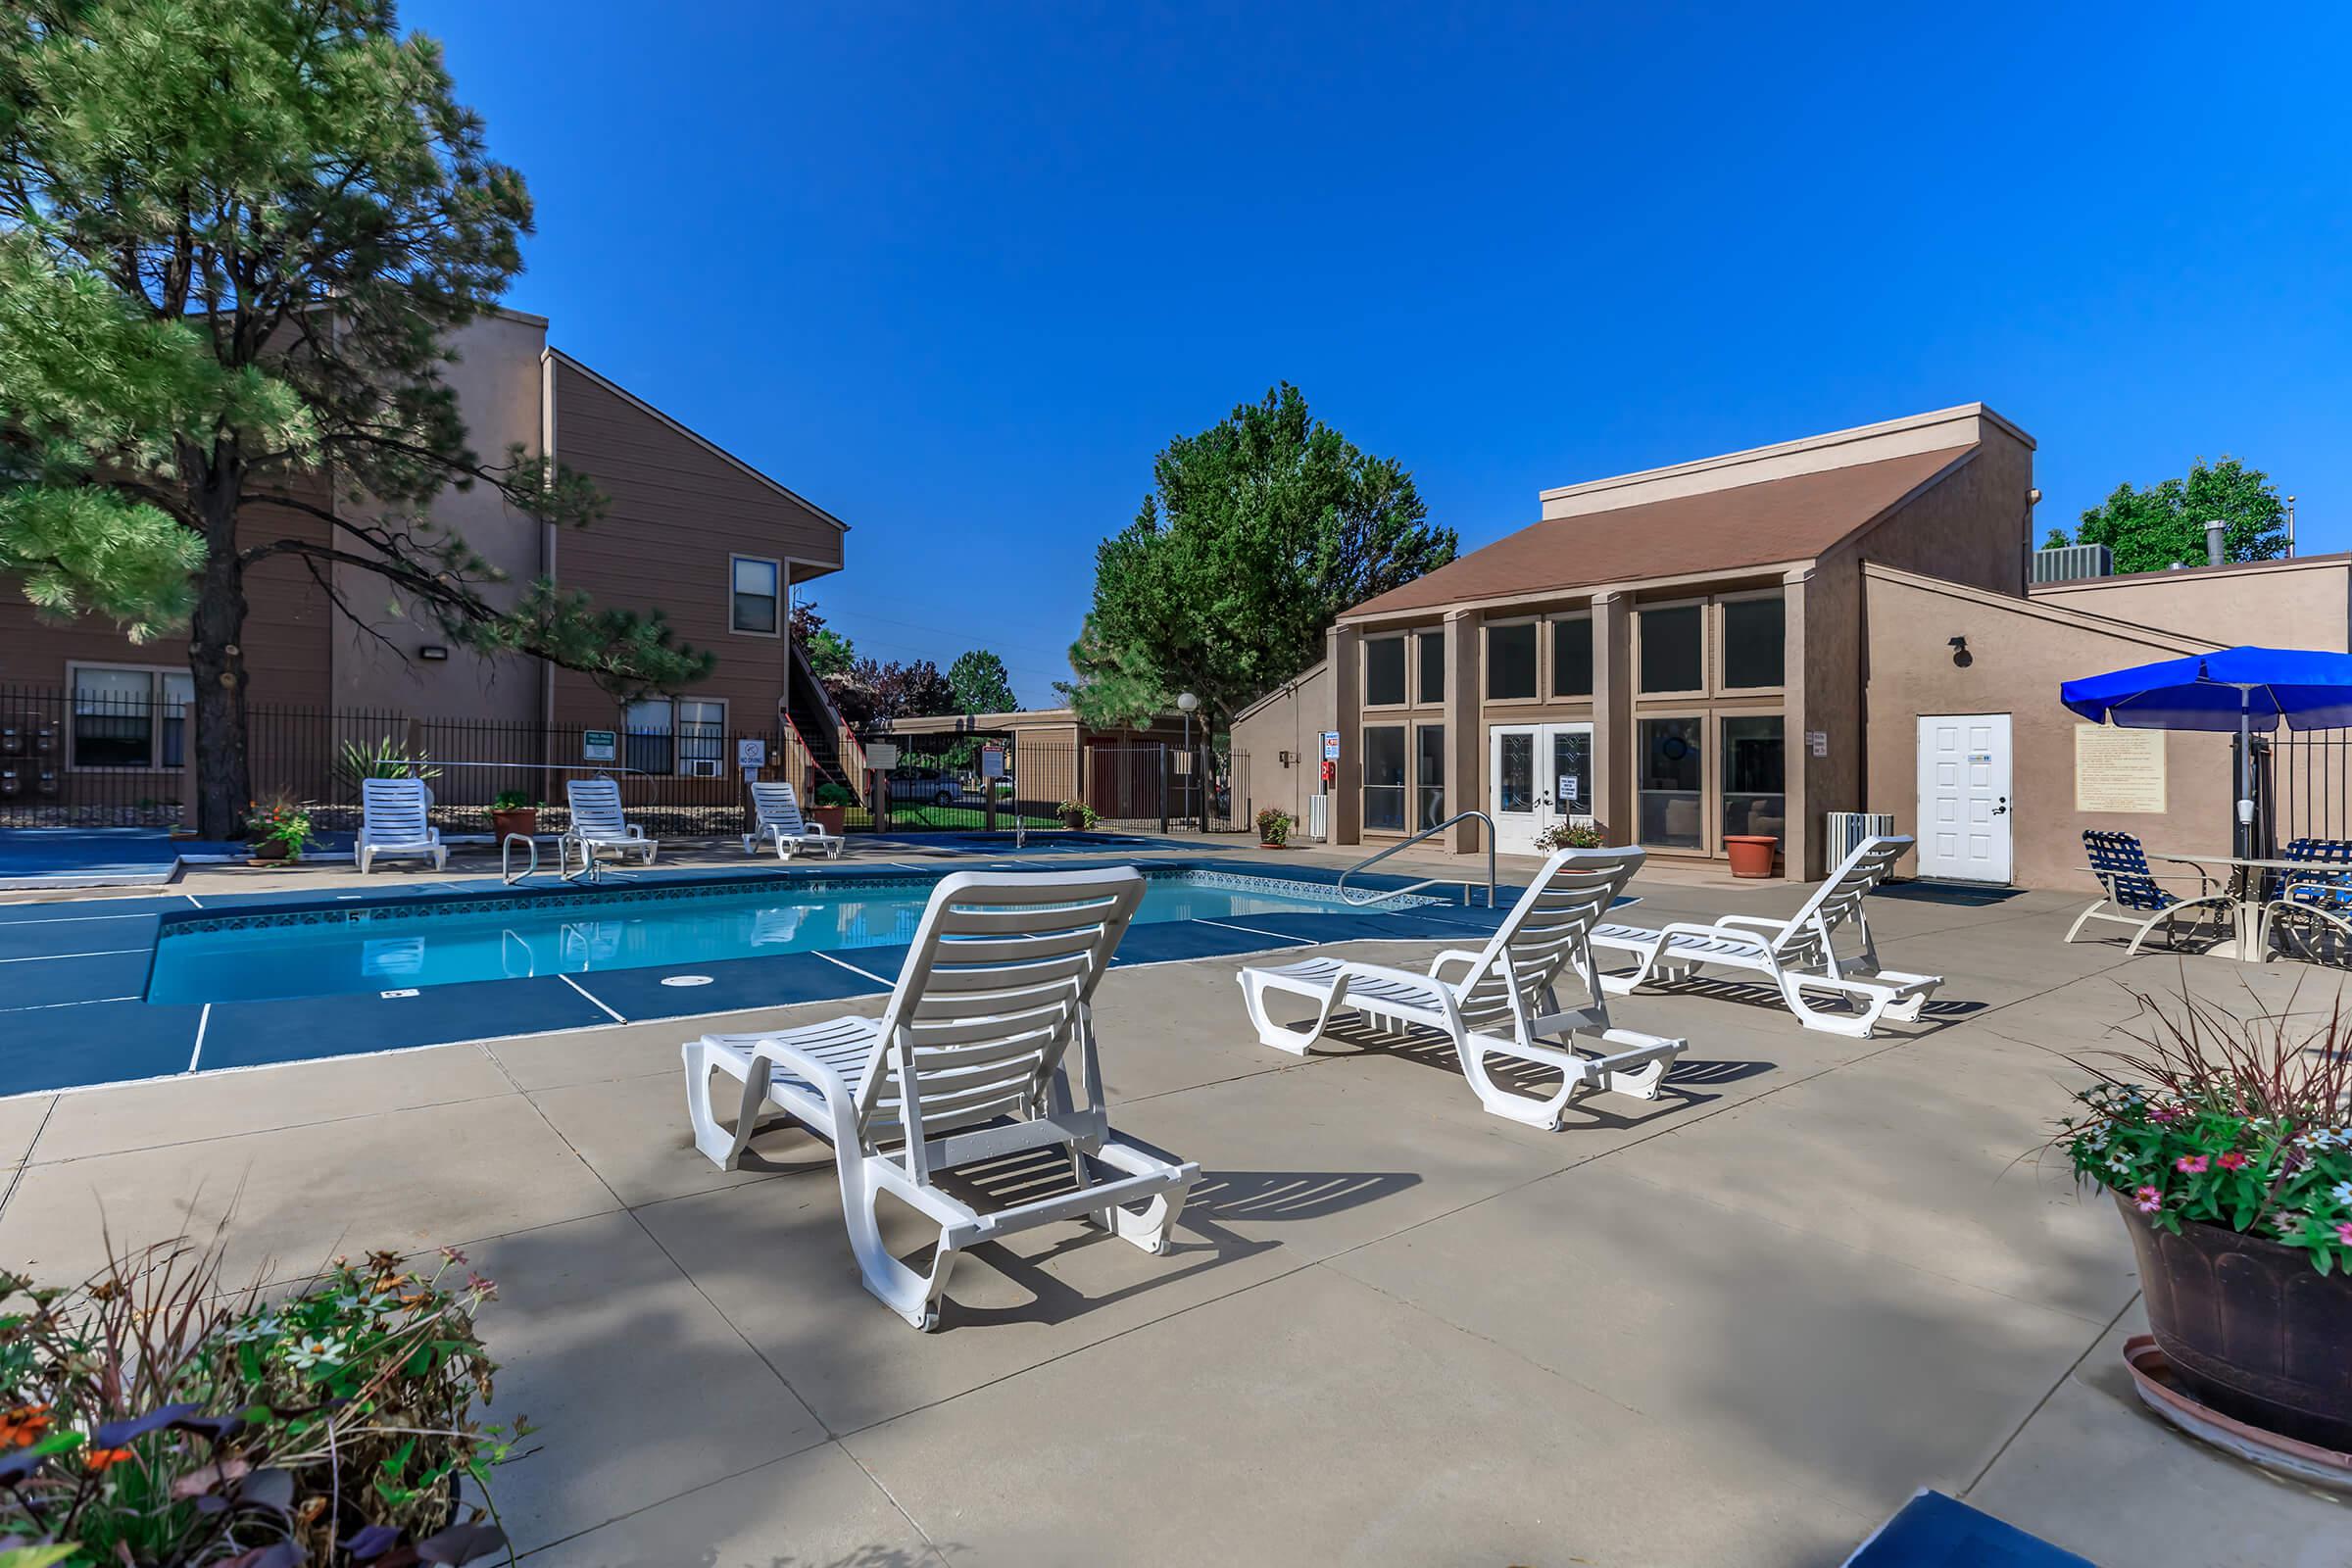 Sunchase community pool with white loungers